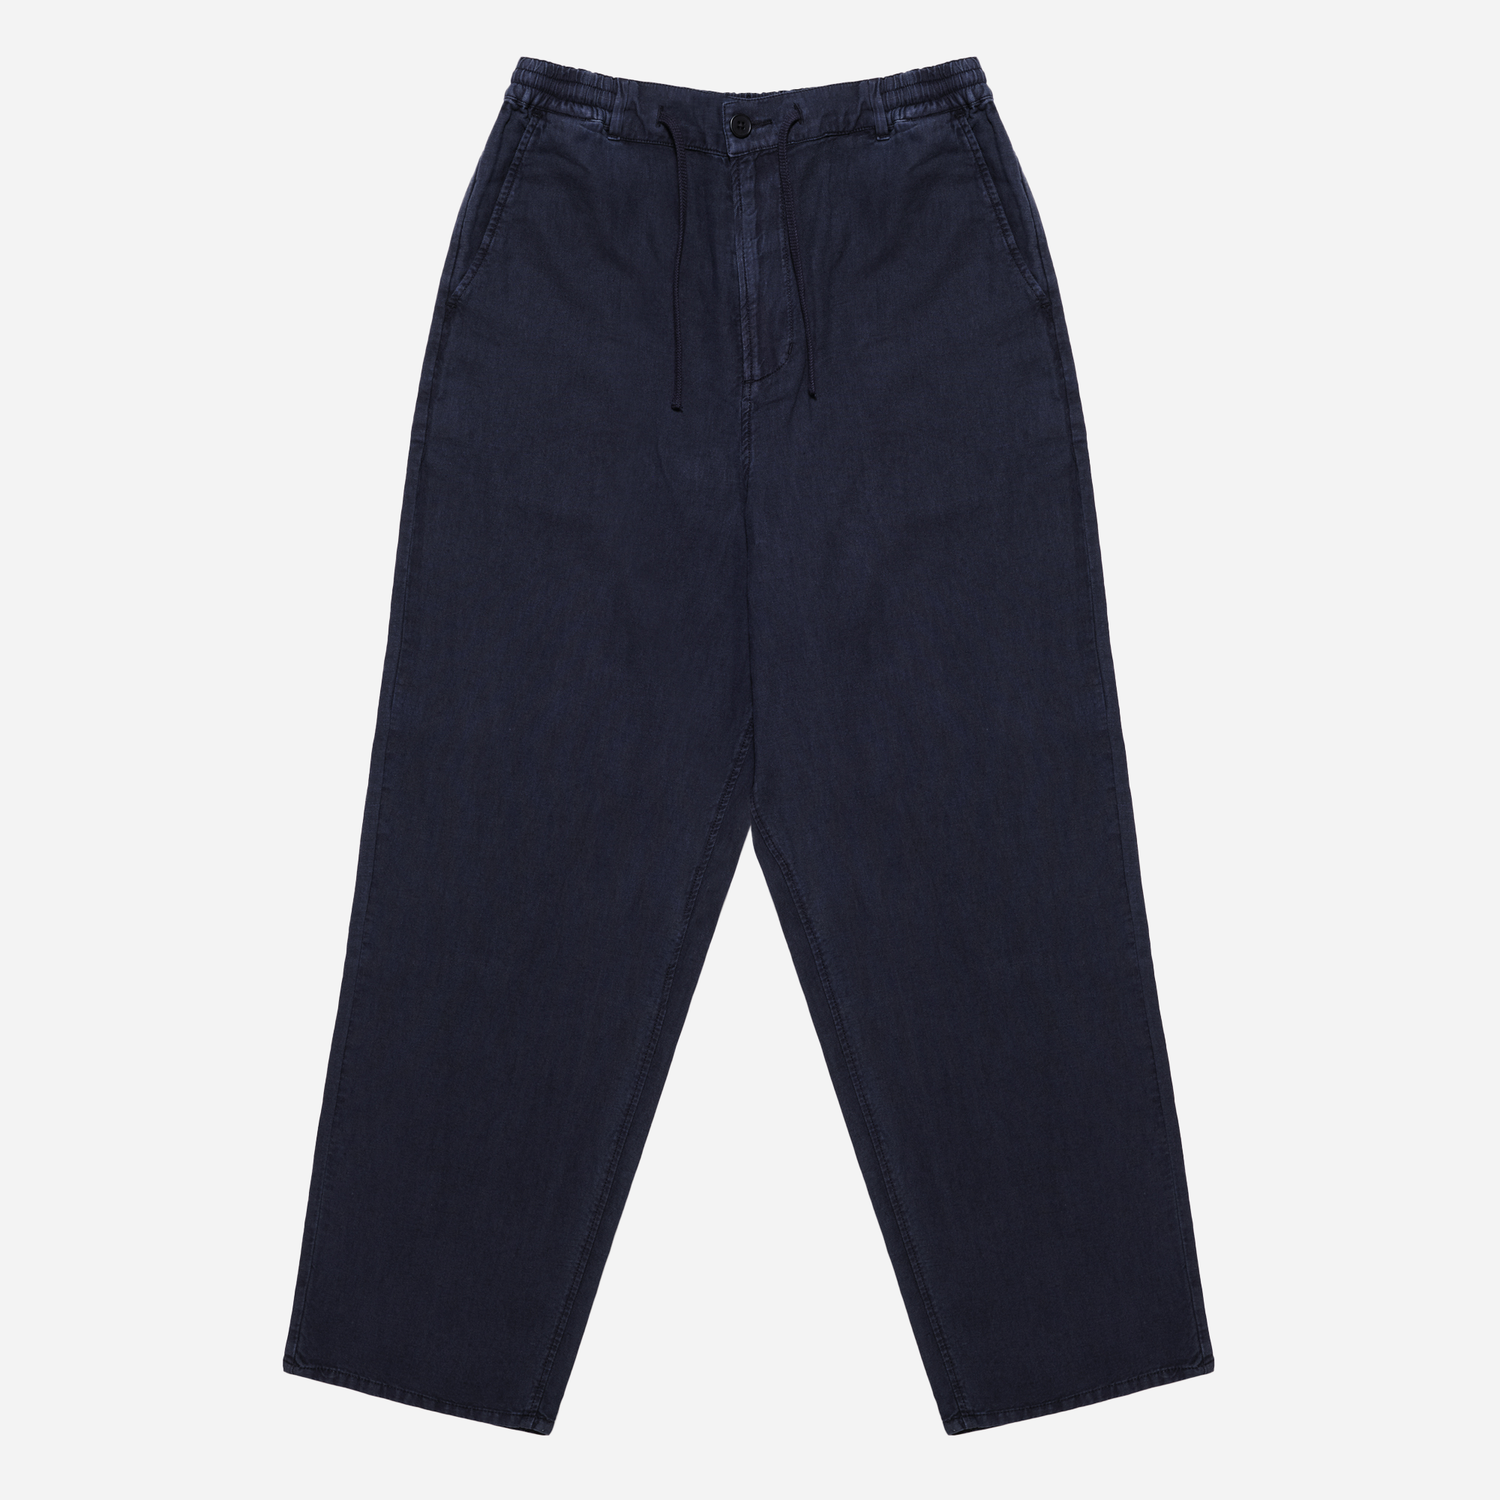 Utility Patchwork Pant (The Harding Capsule)  - Navy